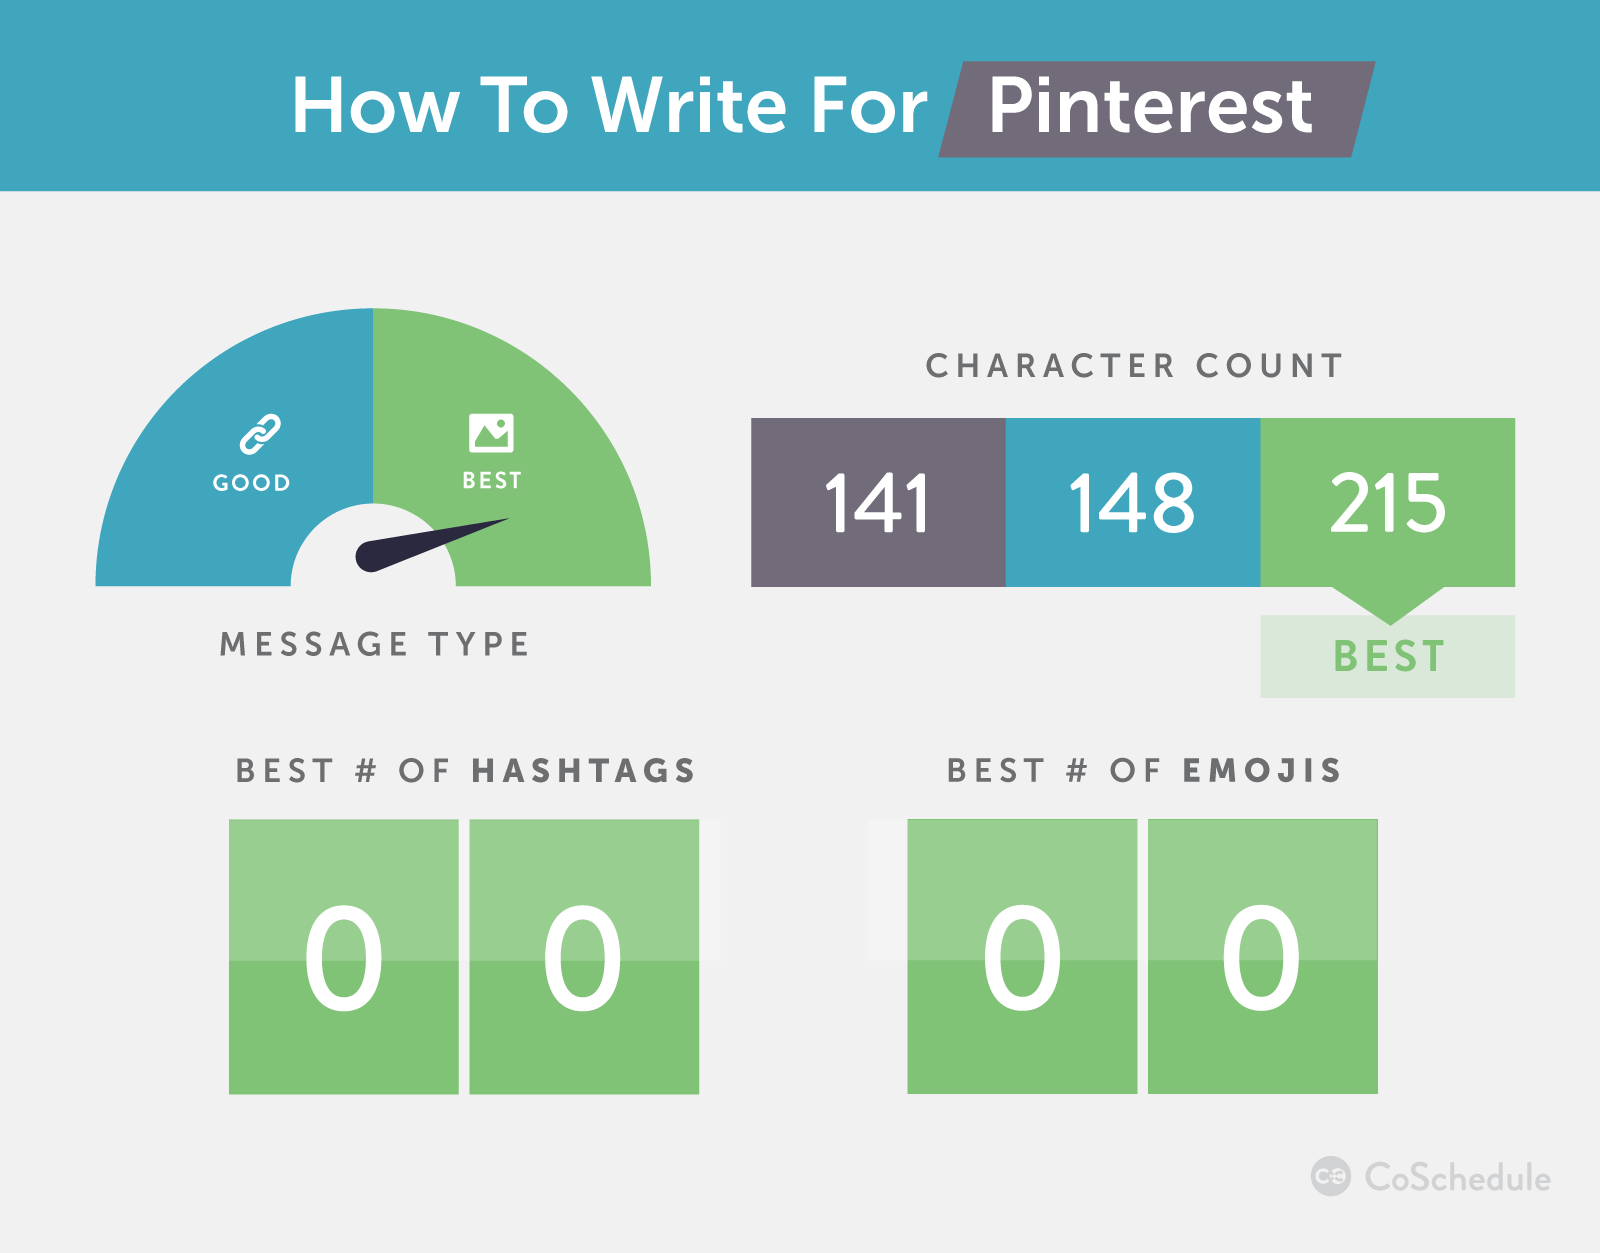 How to write for Pinterest